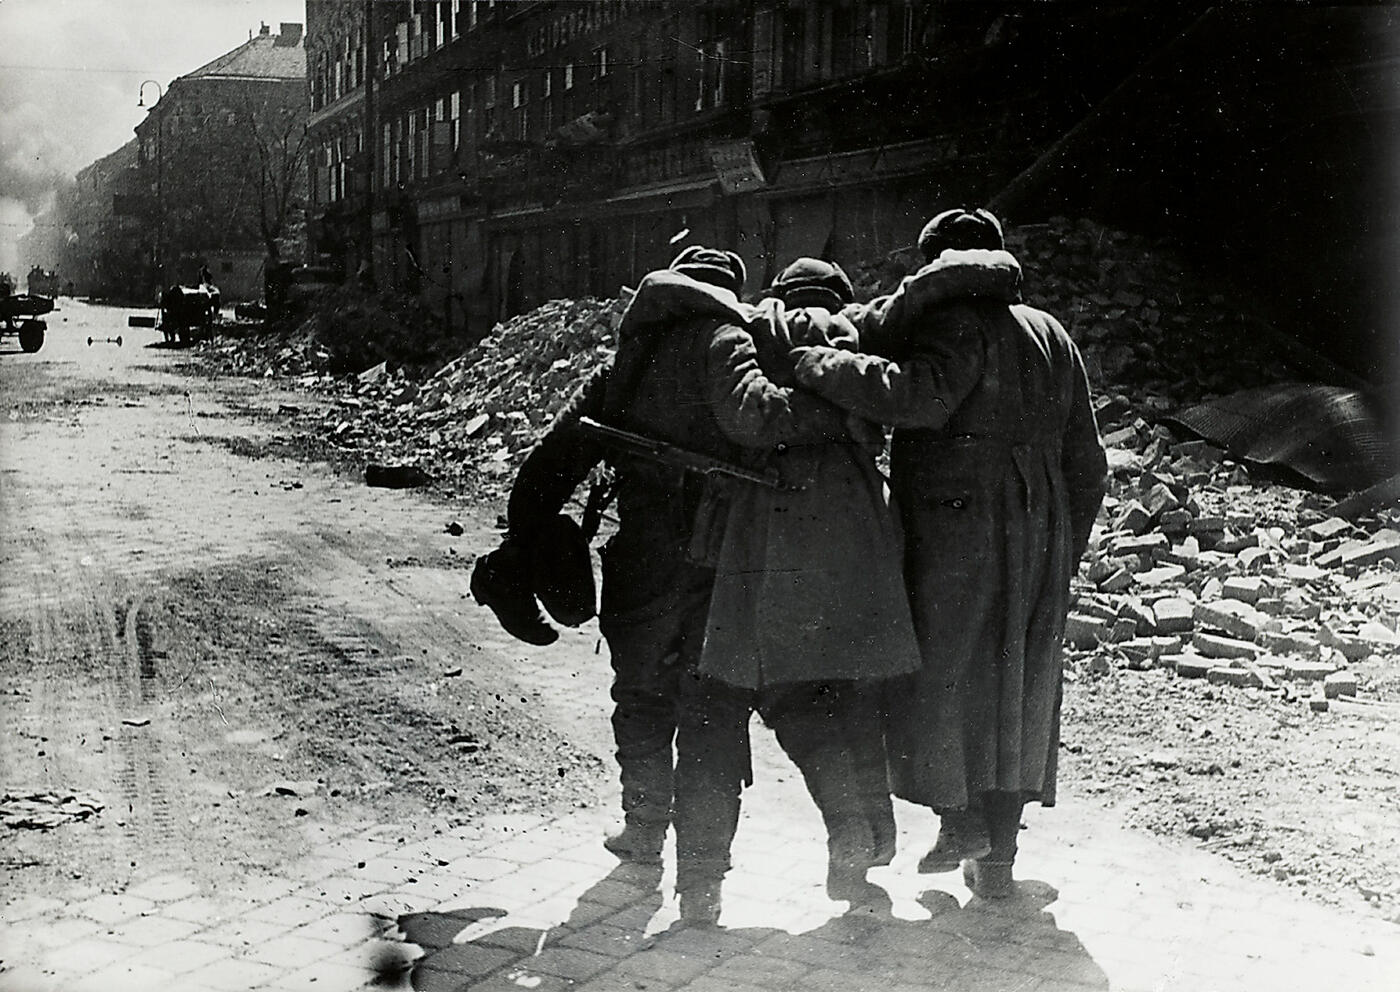 Soldiers Carrying a Wounded Comrade